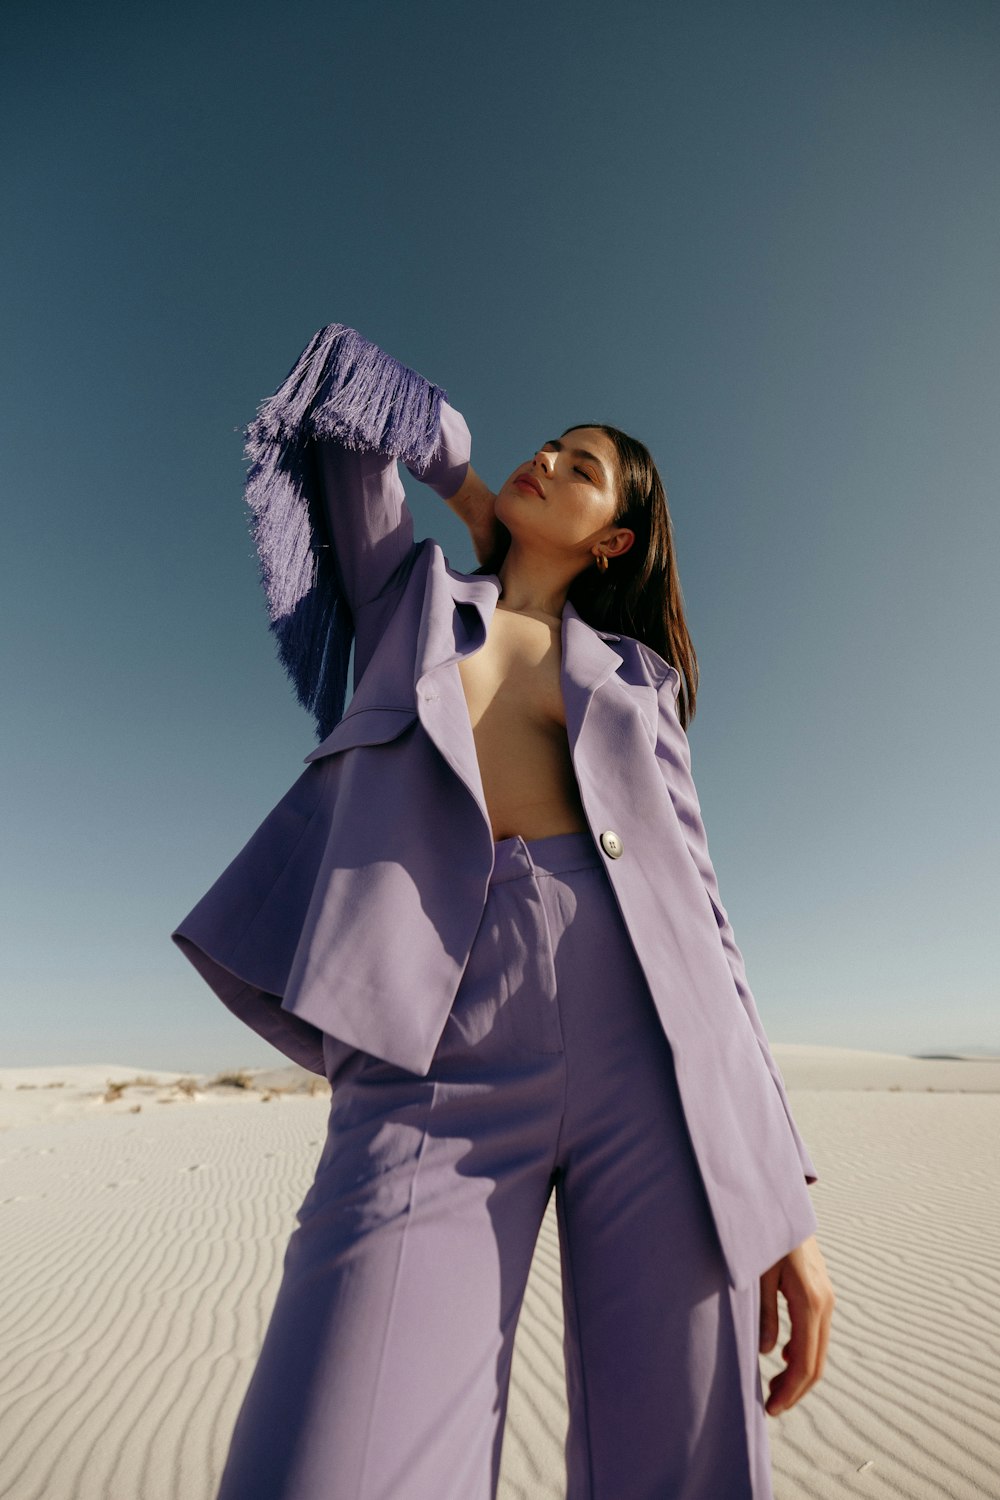 a woman in a purple suit standing in the desert